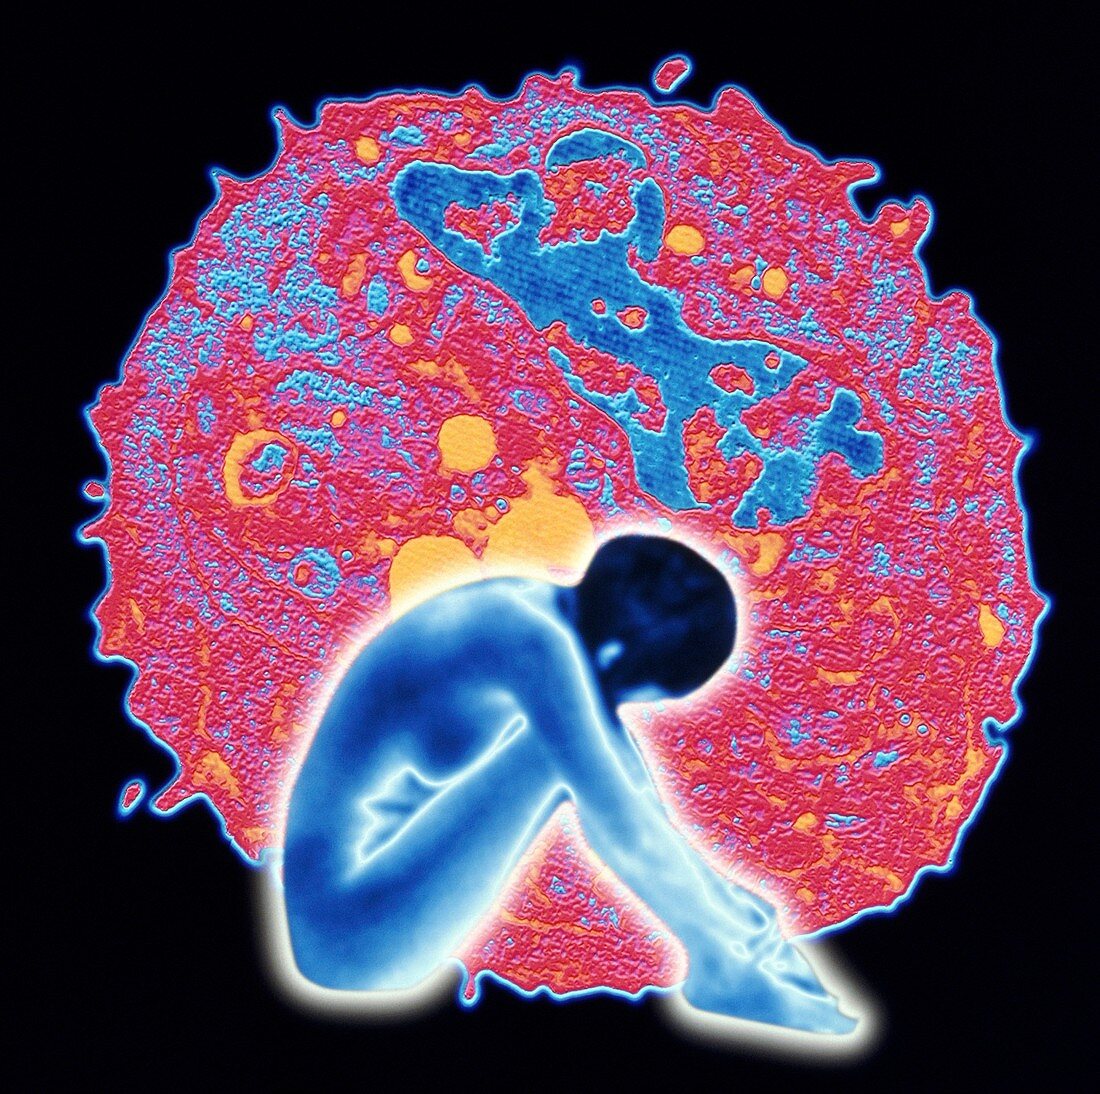 Computer artwork of woman and breast cancer cell